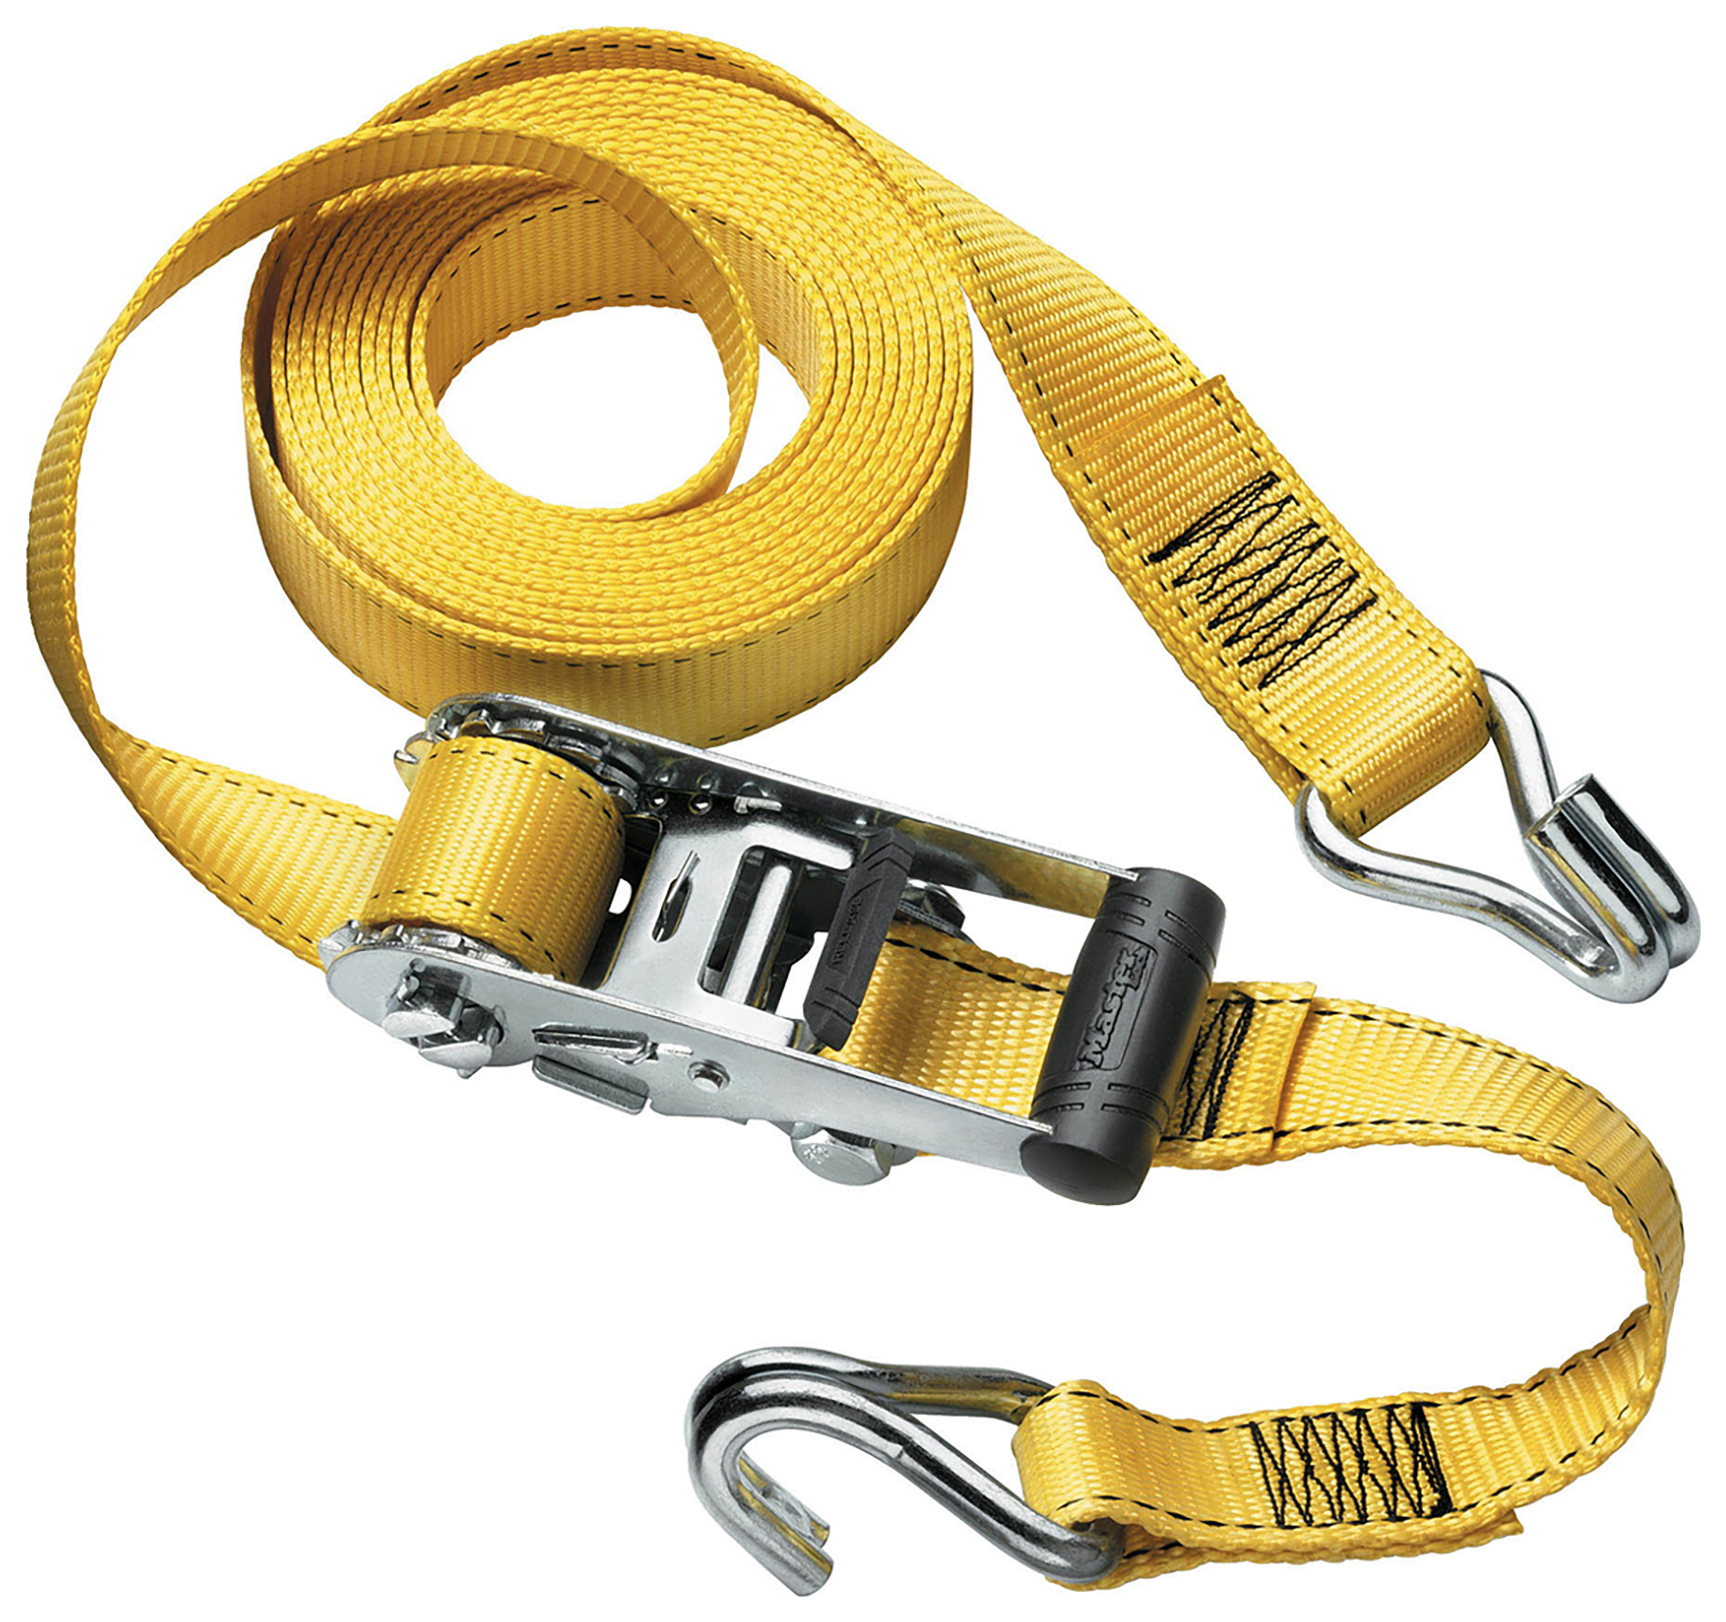 Master Lock Yellow Ratchet Tie Down Strap with J-Hooks - 4.5m x 35mm